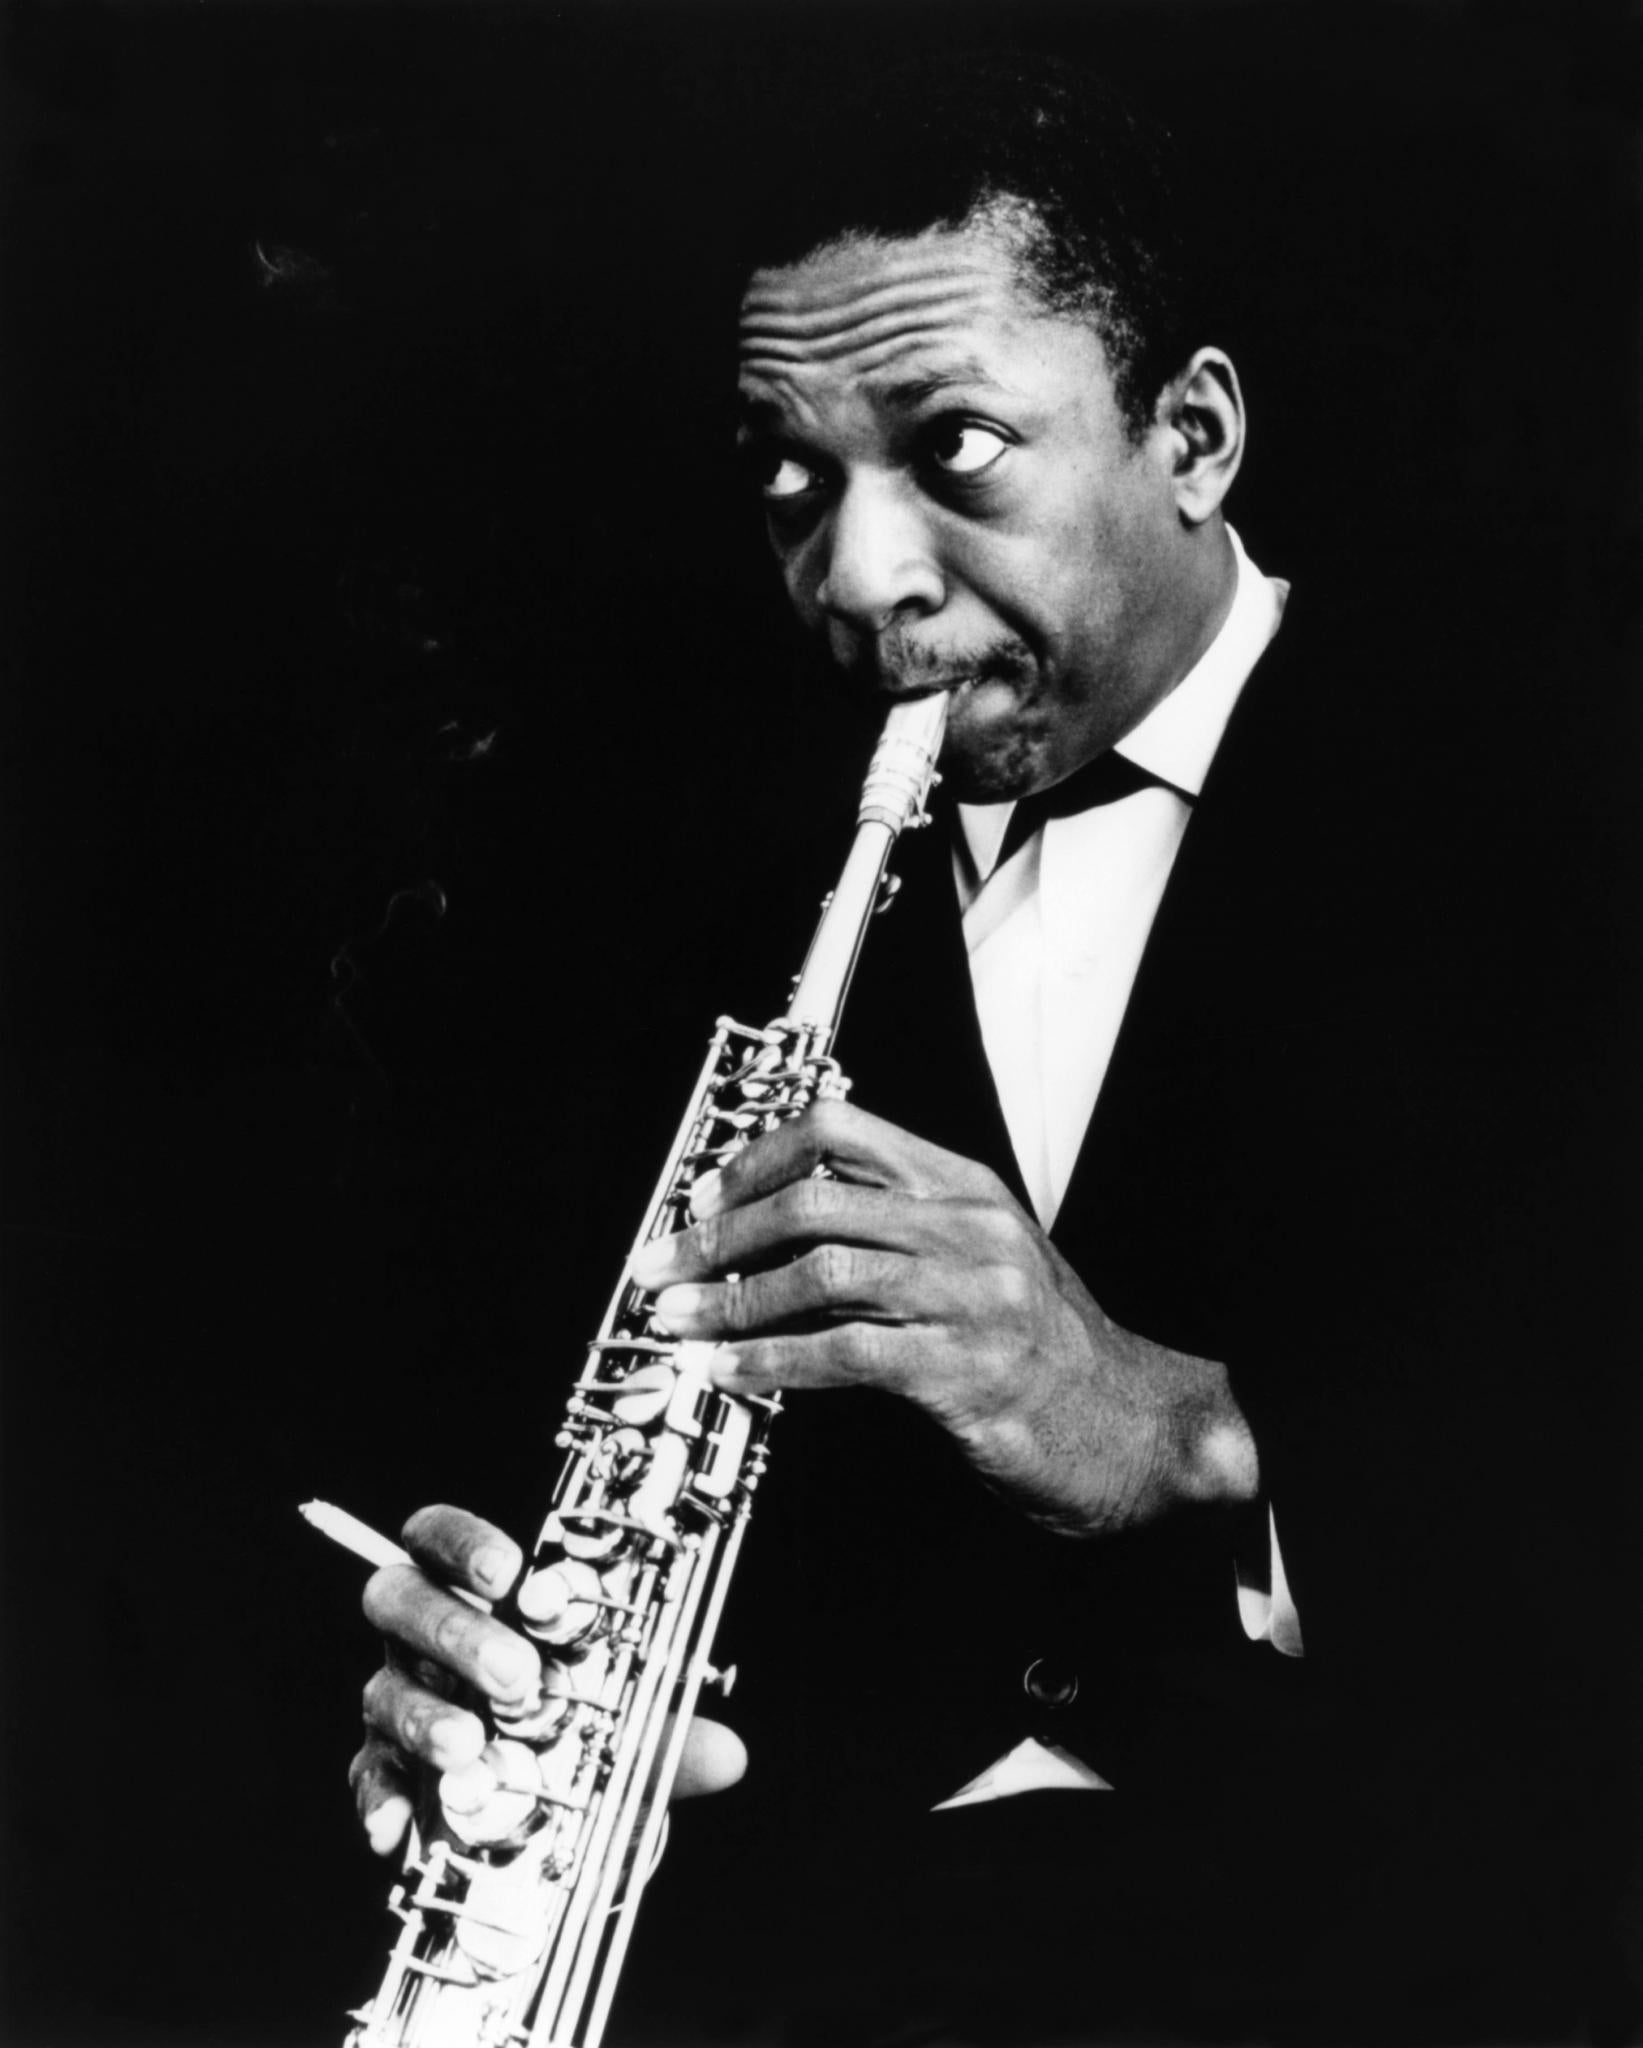 John Coltrane ‘A Love Supreme’ Added to the Library of Congress